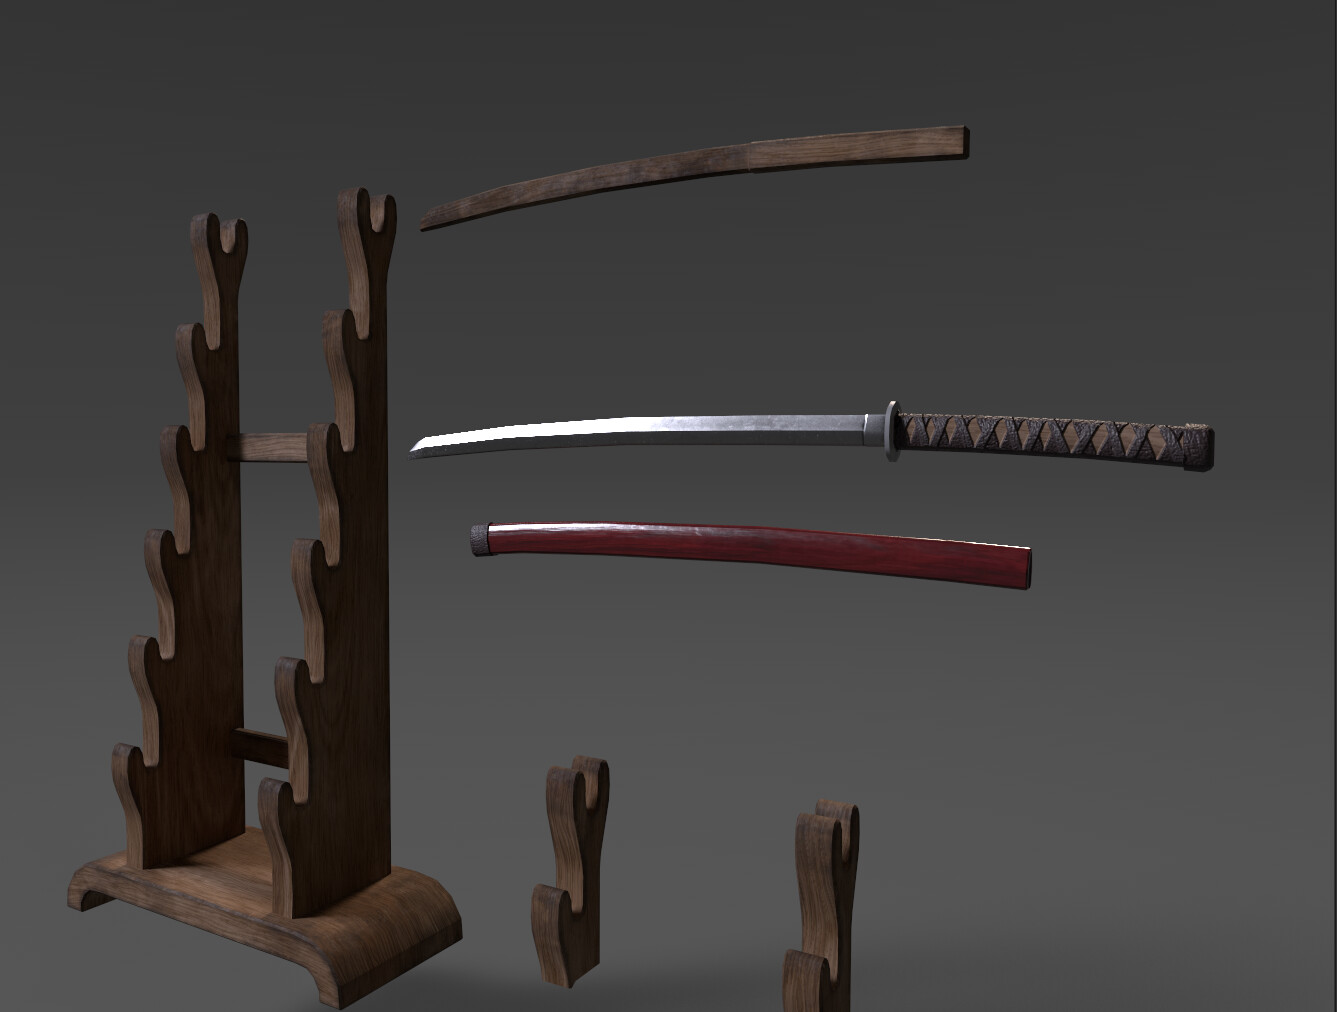 Substance painter screenshot of the sword and weapon racks. The sword, the practice sword, and the racks are all one material.